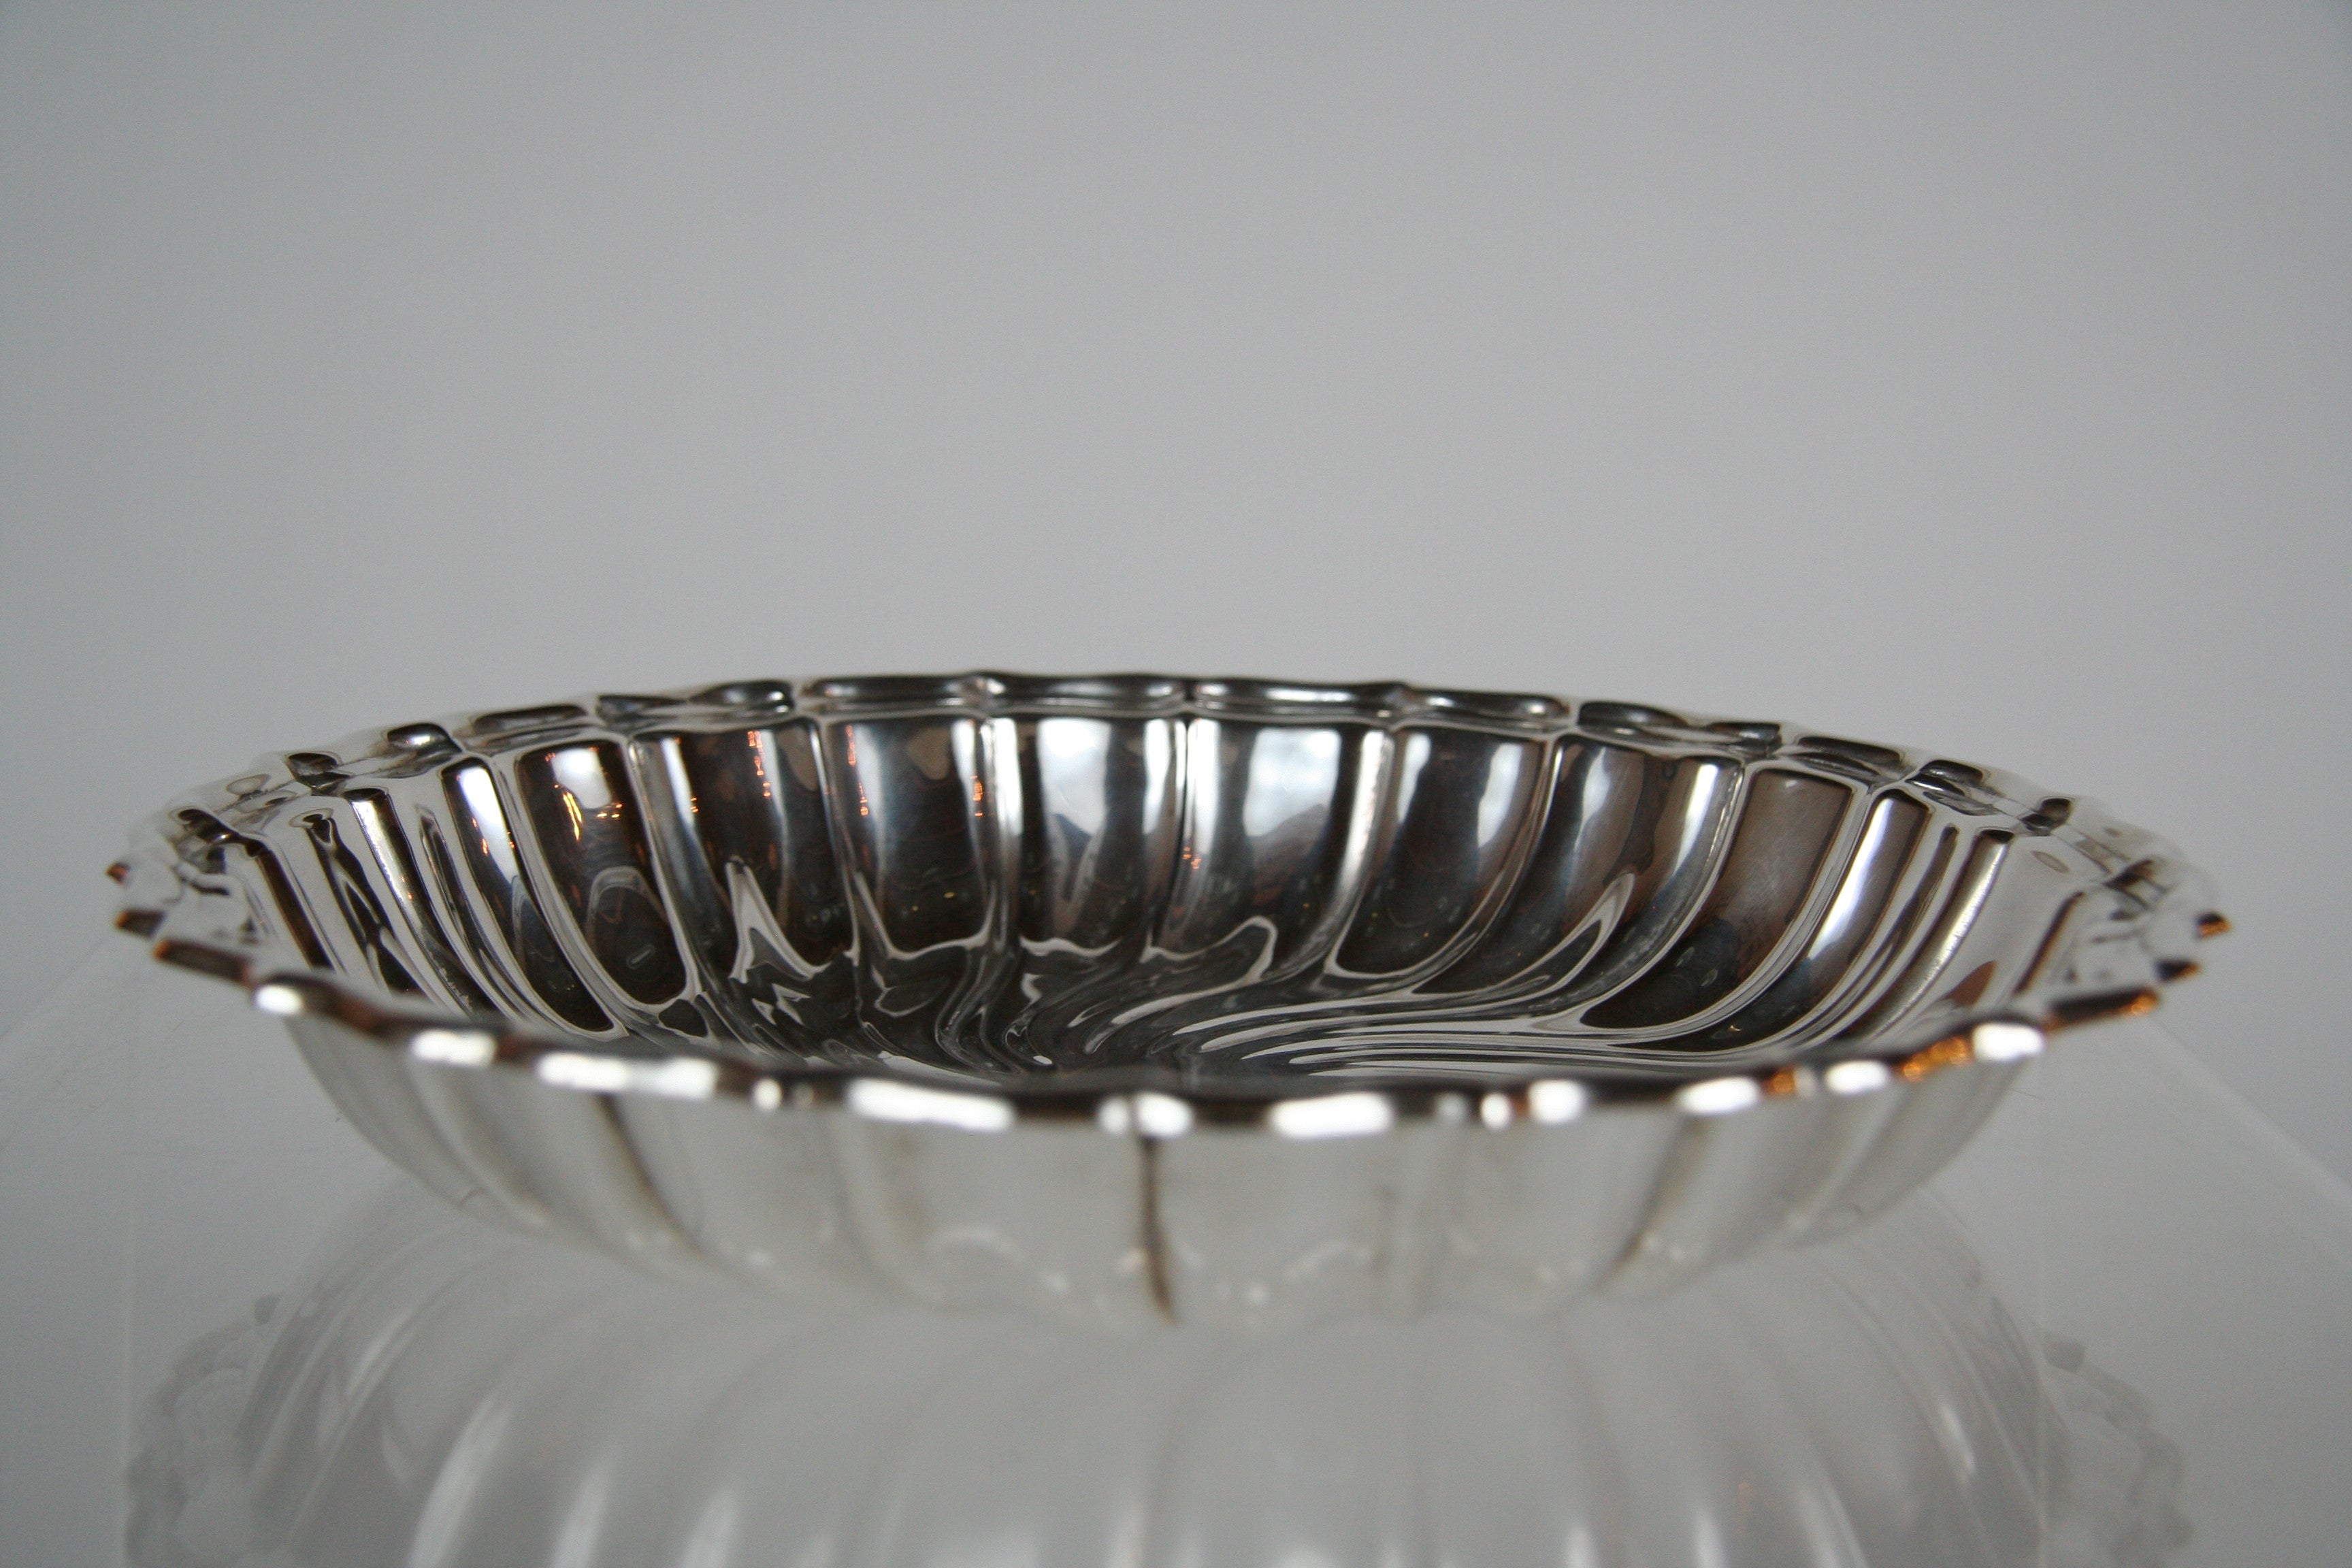 A Large Gorham Sterling Bowl with Swirl Design